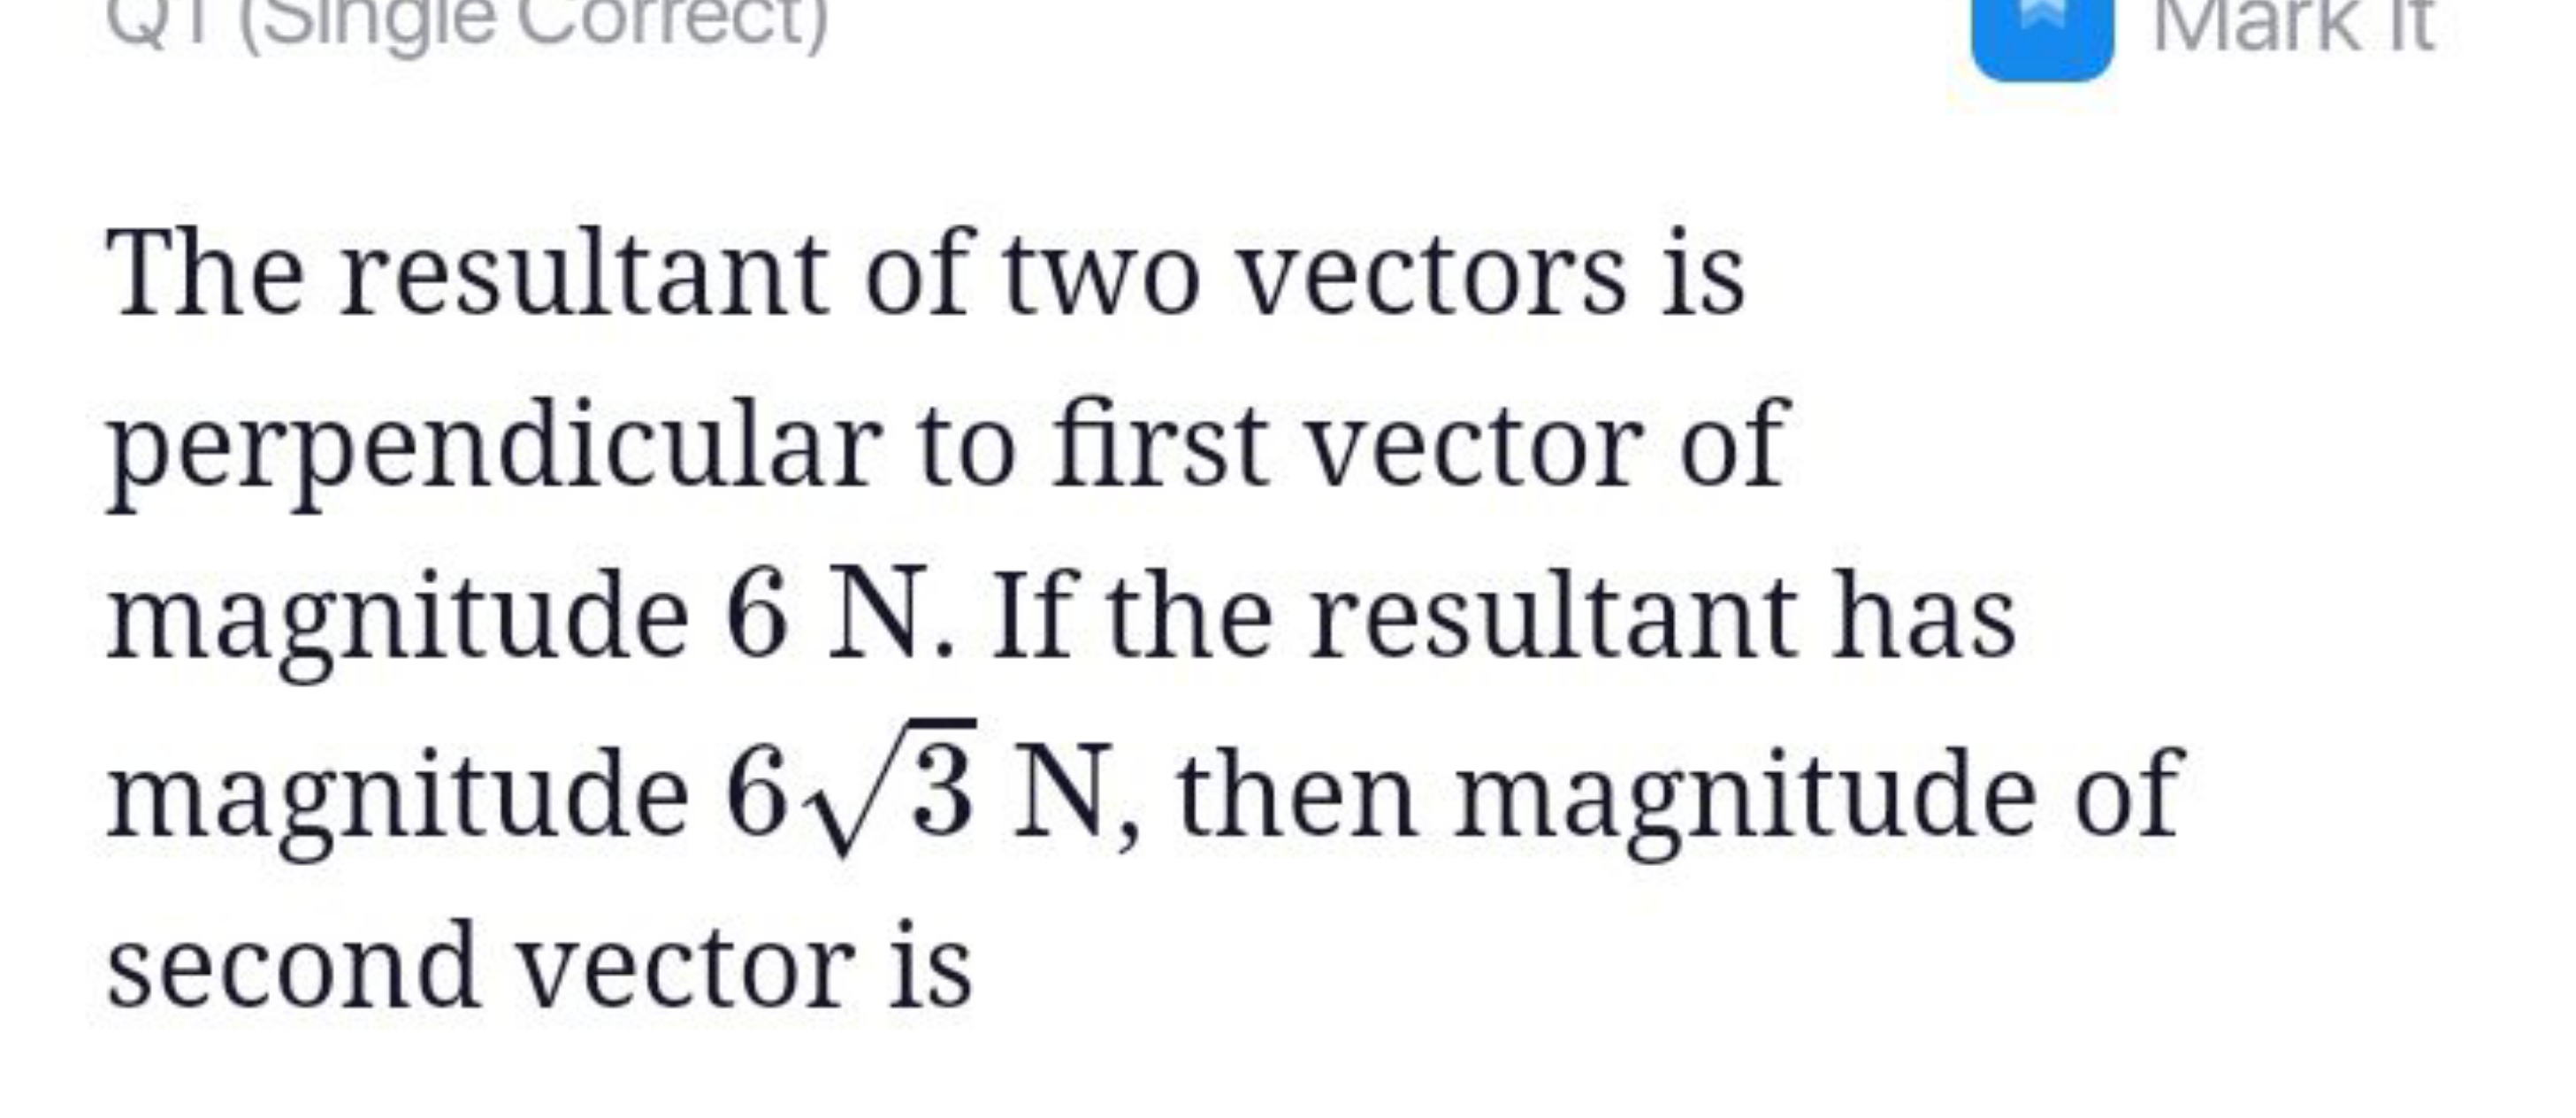 The resultant of two vectors is perpendicular to first vector of magni